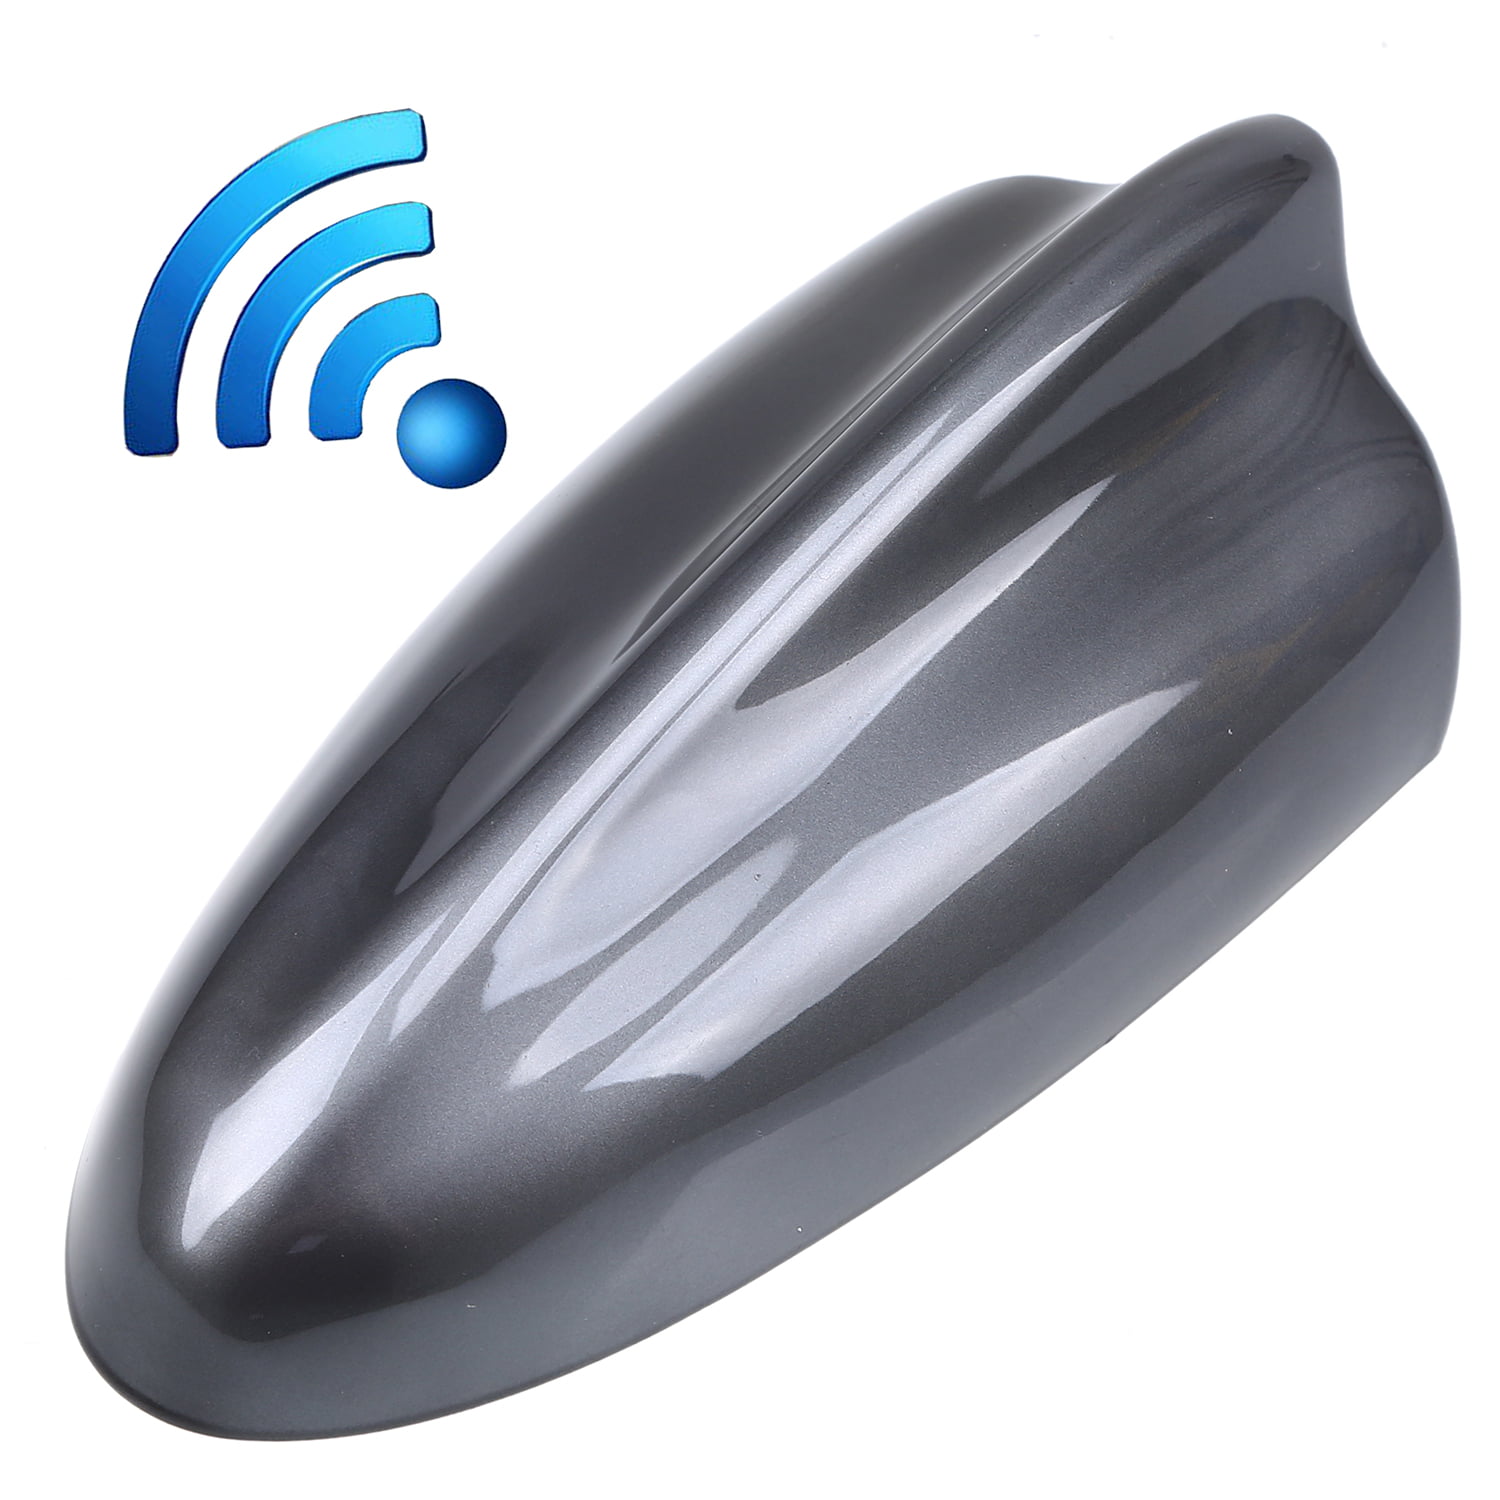 Universal Car Shark Fin Antenna AM/FM Radio Signal Roof Aerial for Auto SUV  Truck Offroad with Adhesive Base Waterproof 